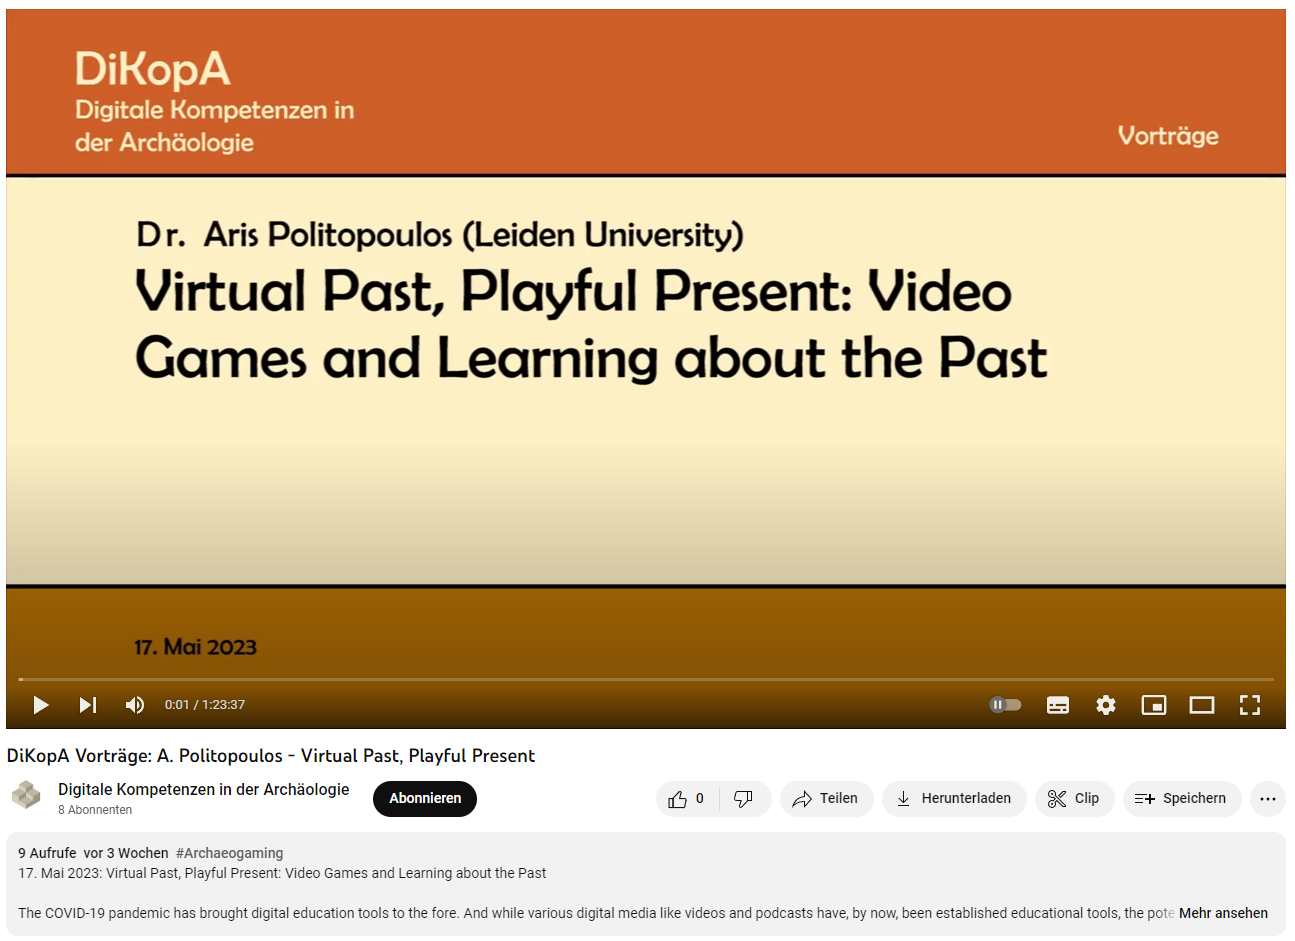 The image shows the title screen of a YouTube video that is stored at the DiKopA YouTube channel.